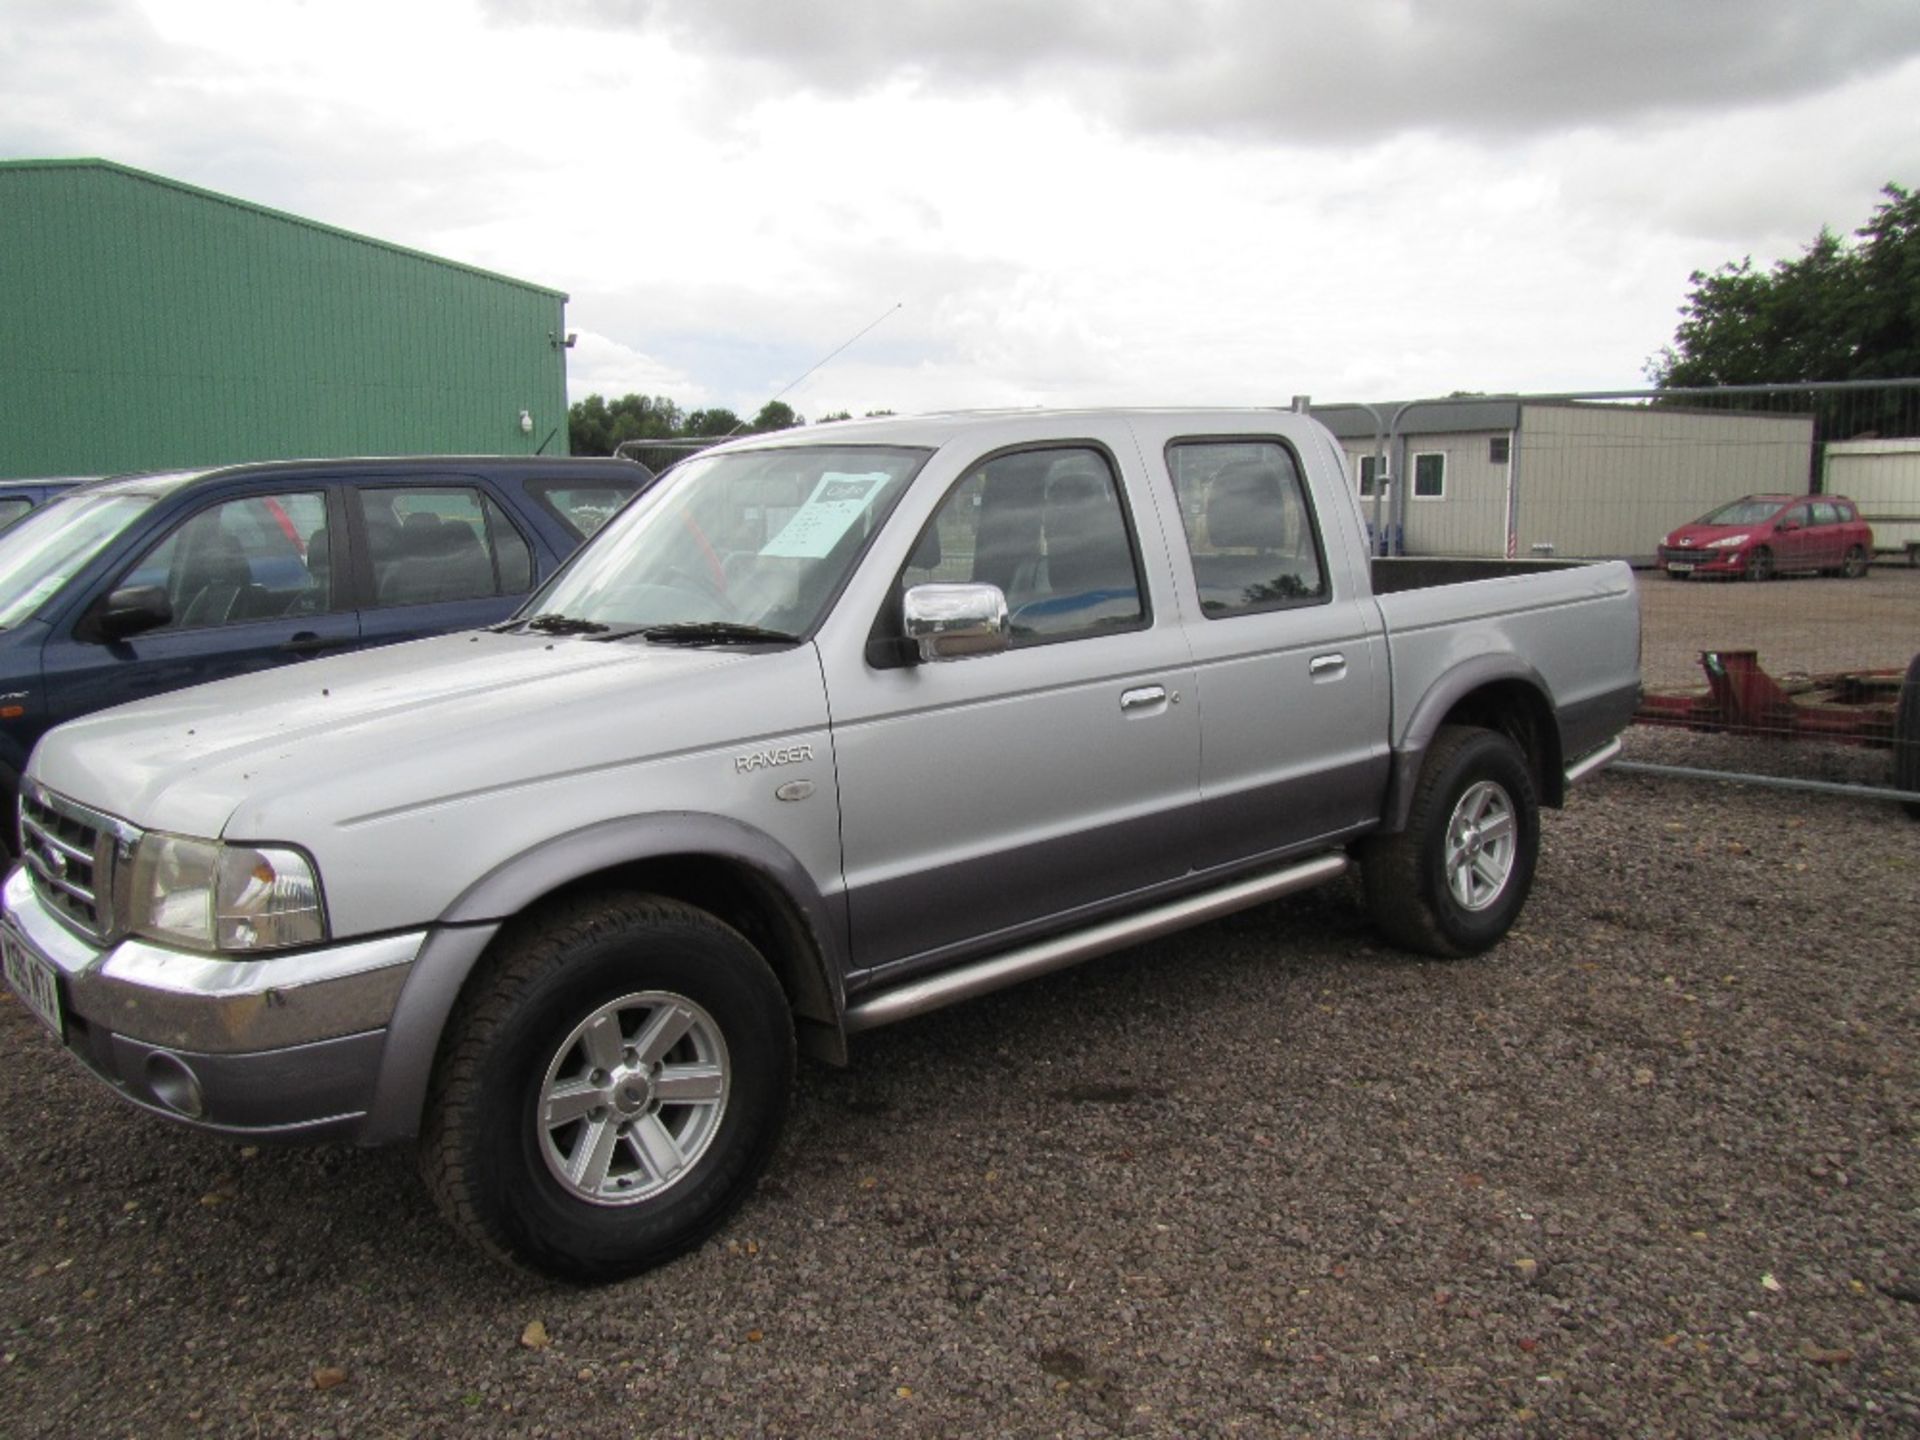 Ford Ranger 2.4 Diesel 5 Speed Manual with Crew Cab, Air Con & Leather Interior. Mileage: 116,000.